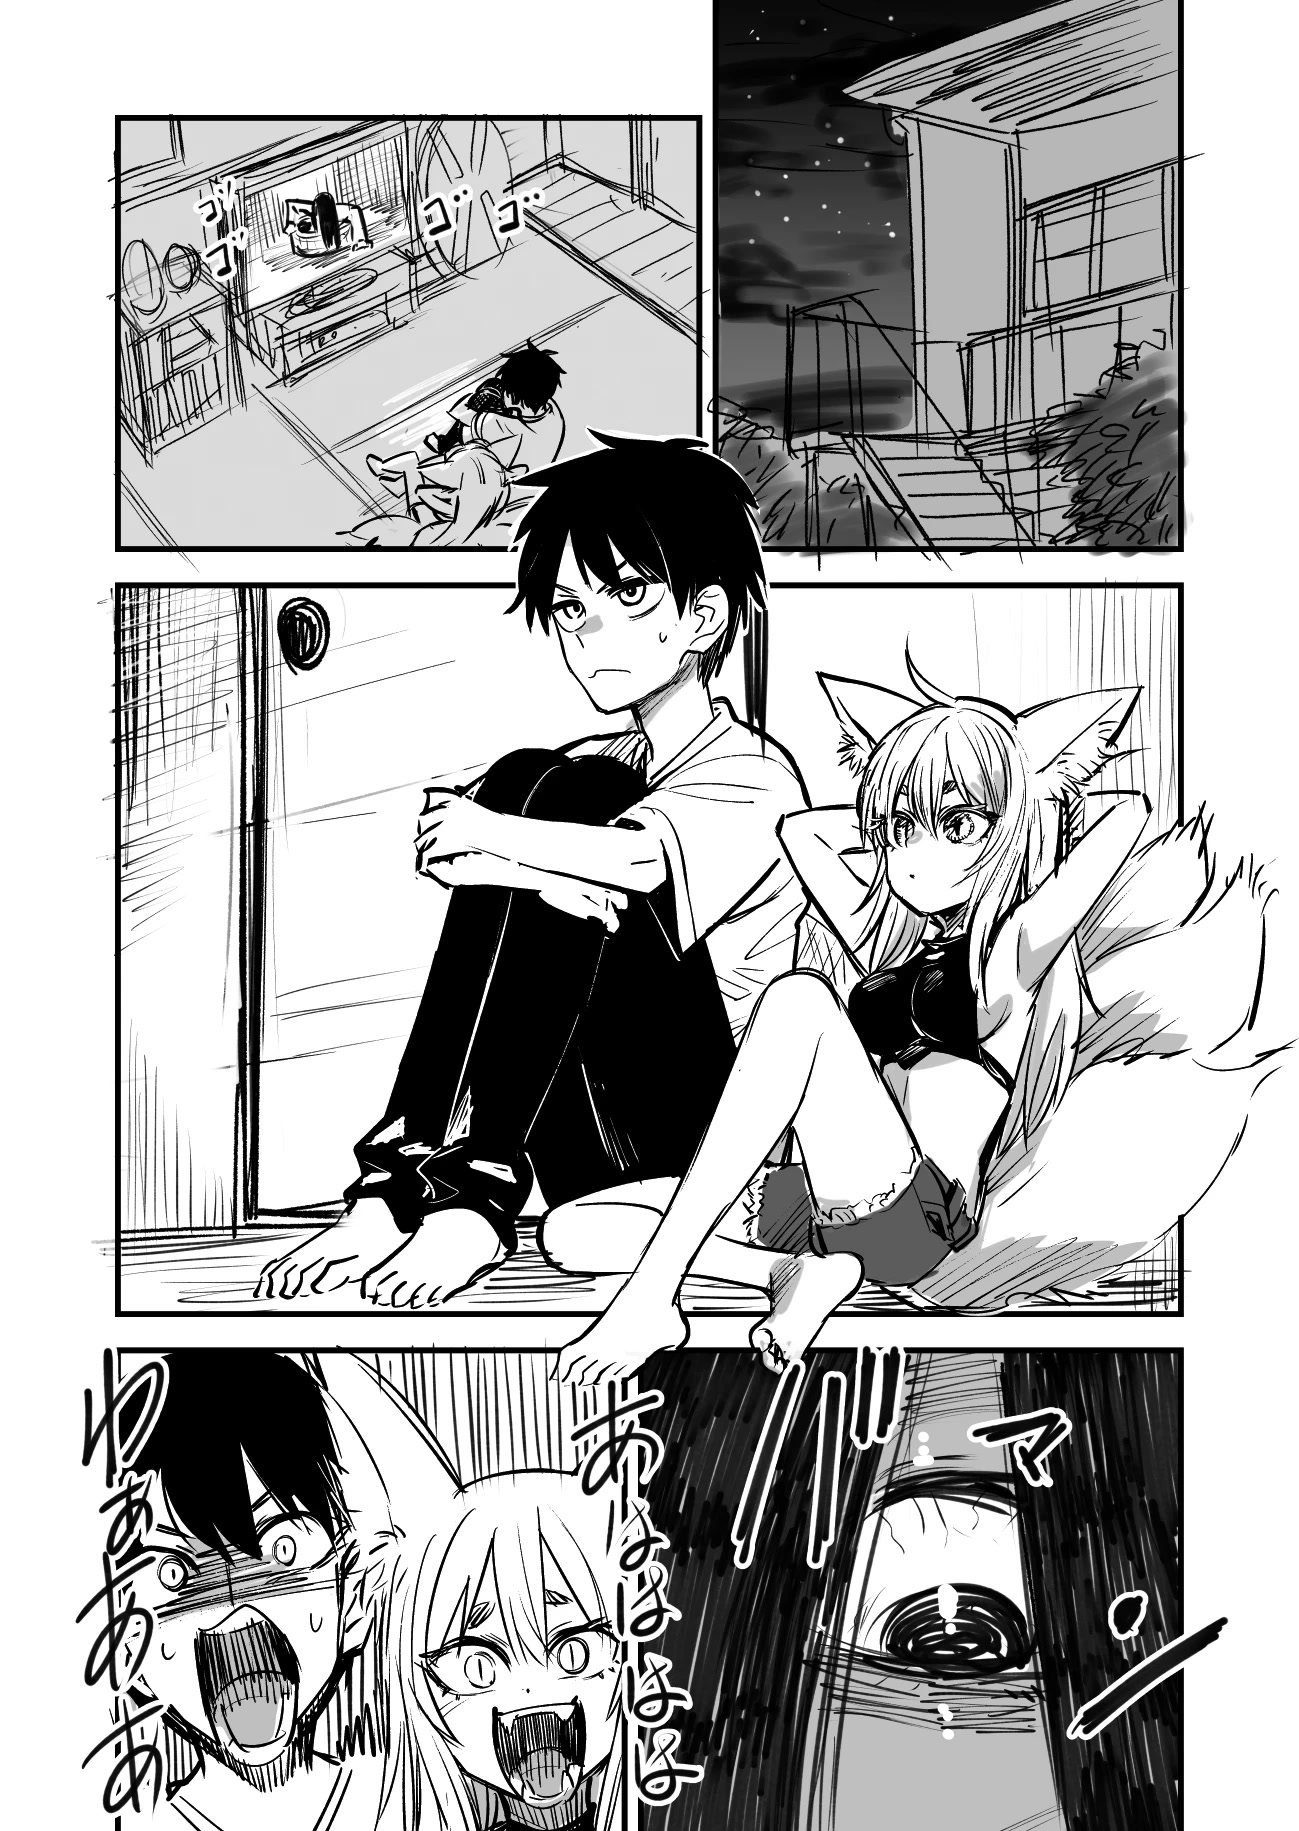 A Tale Of Being Eaten By A Man-Eating Youkai - Page 2